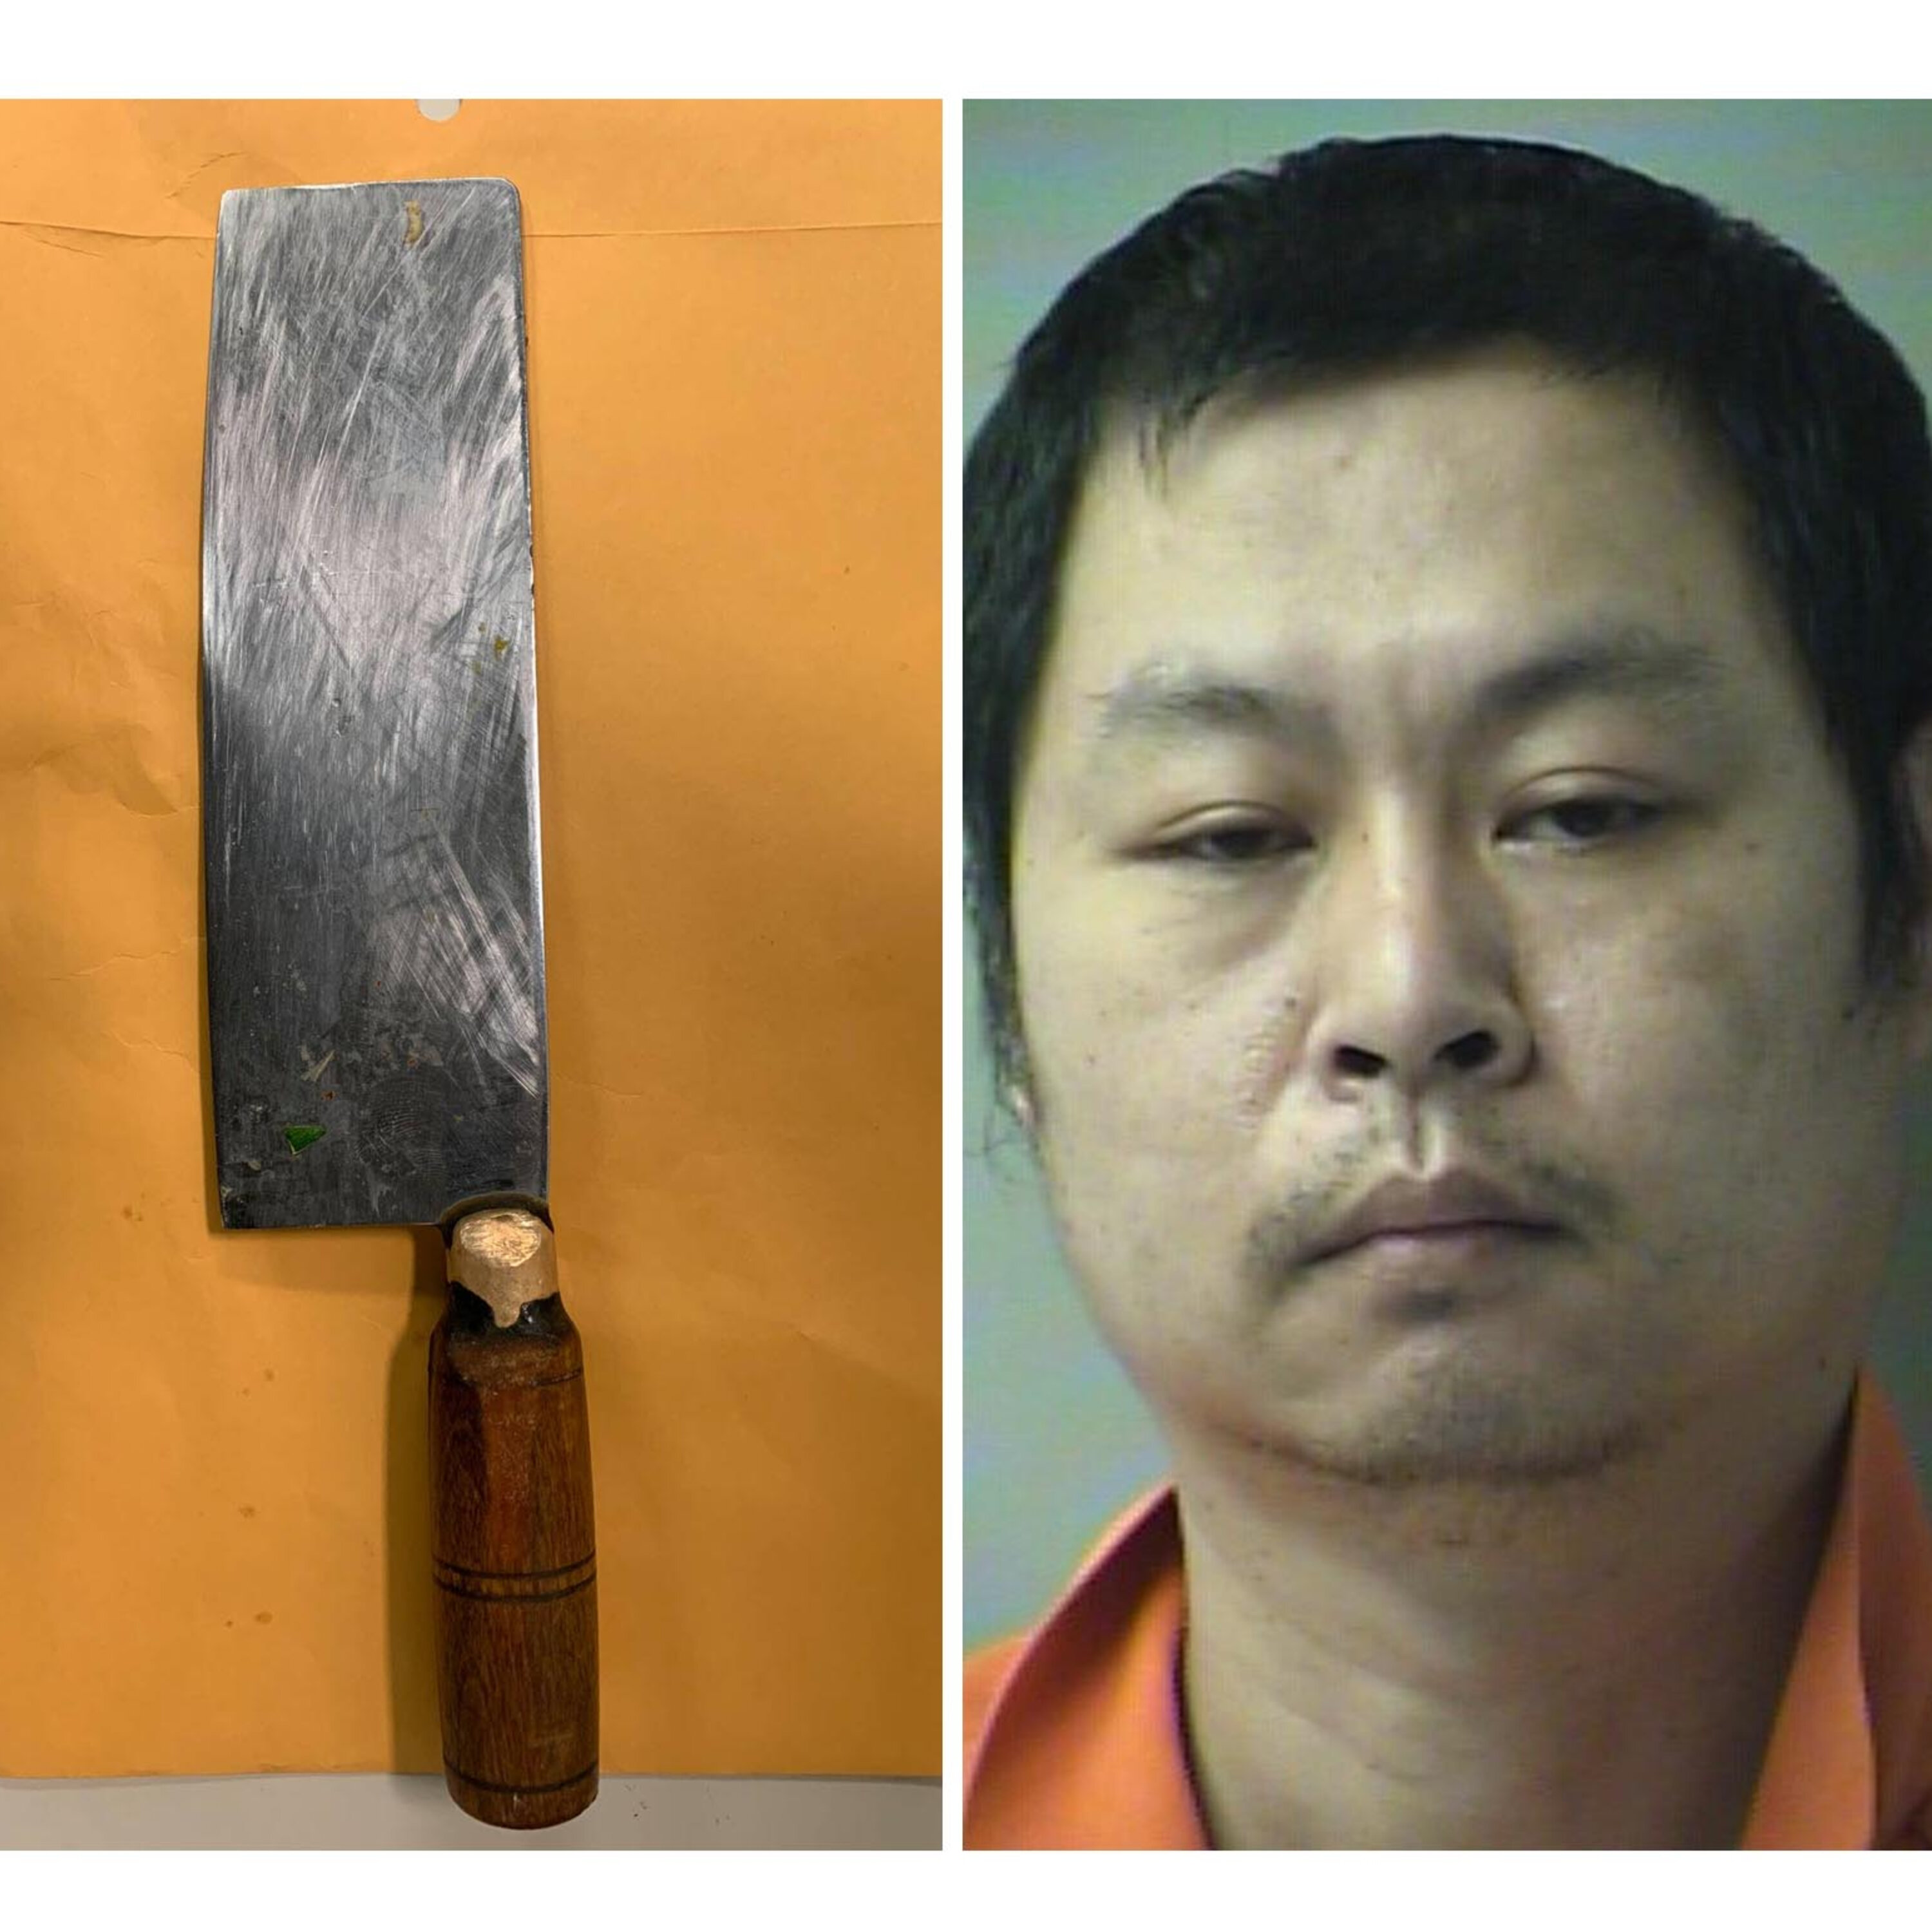 LISTEN: Shalimar man allegedly uses cleaver to threaten McDonald's manager, customer